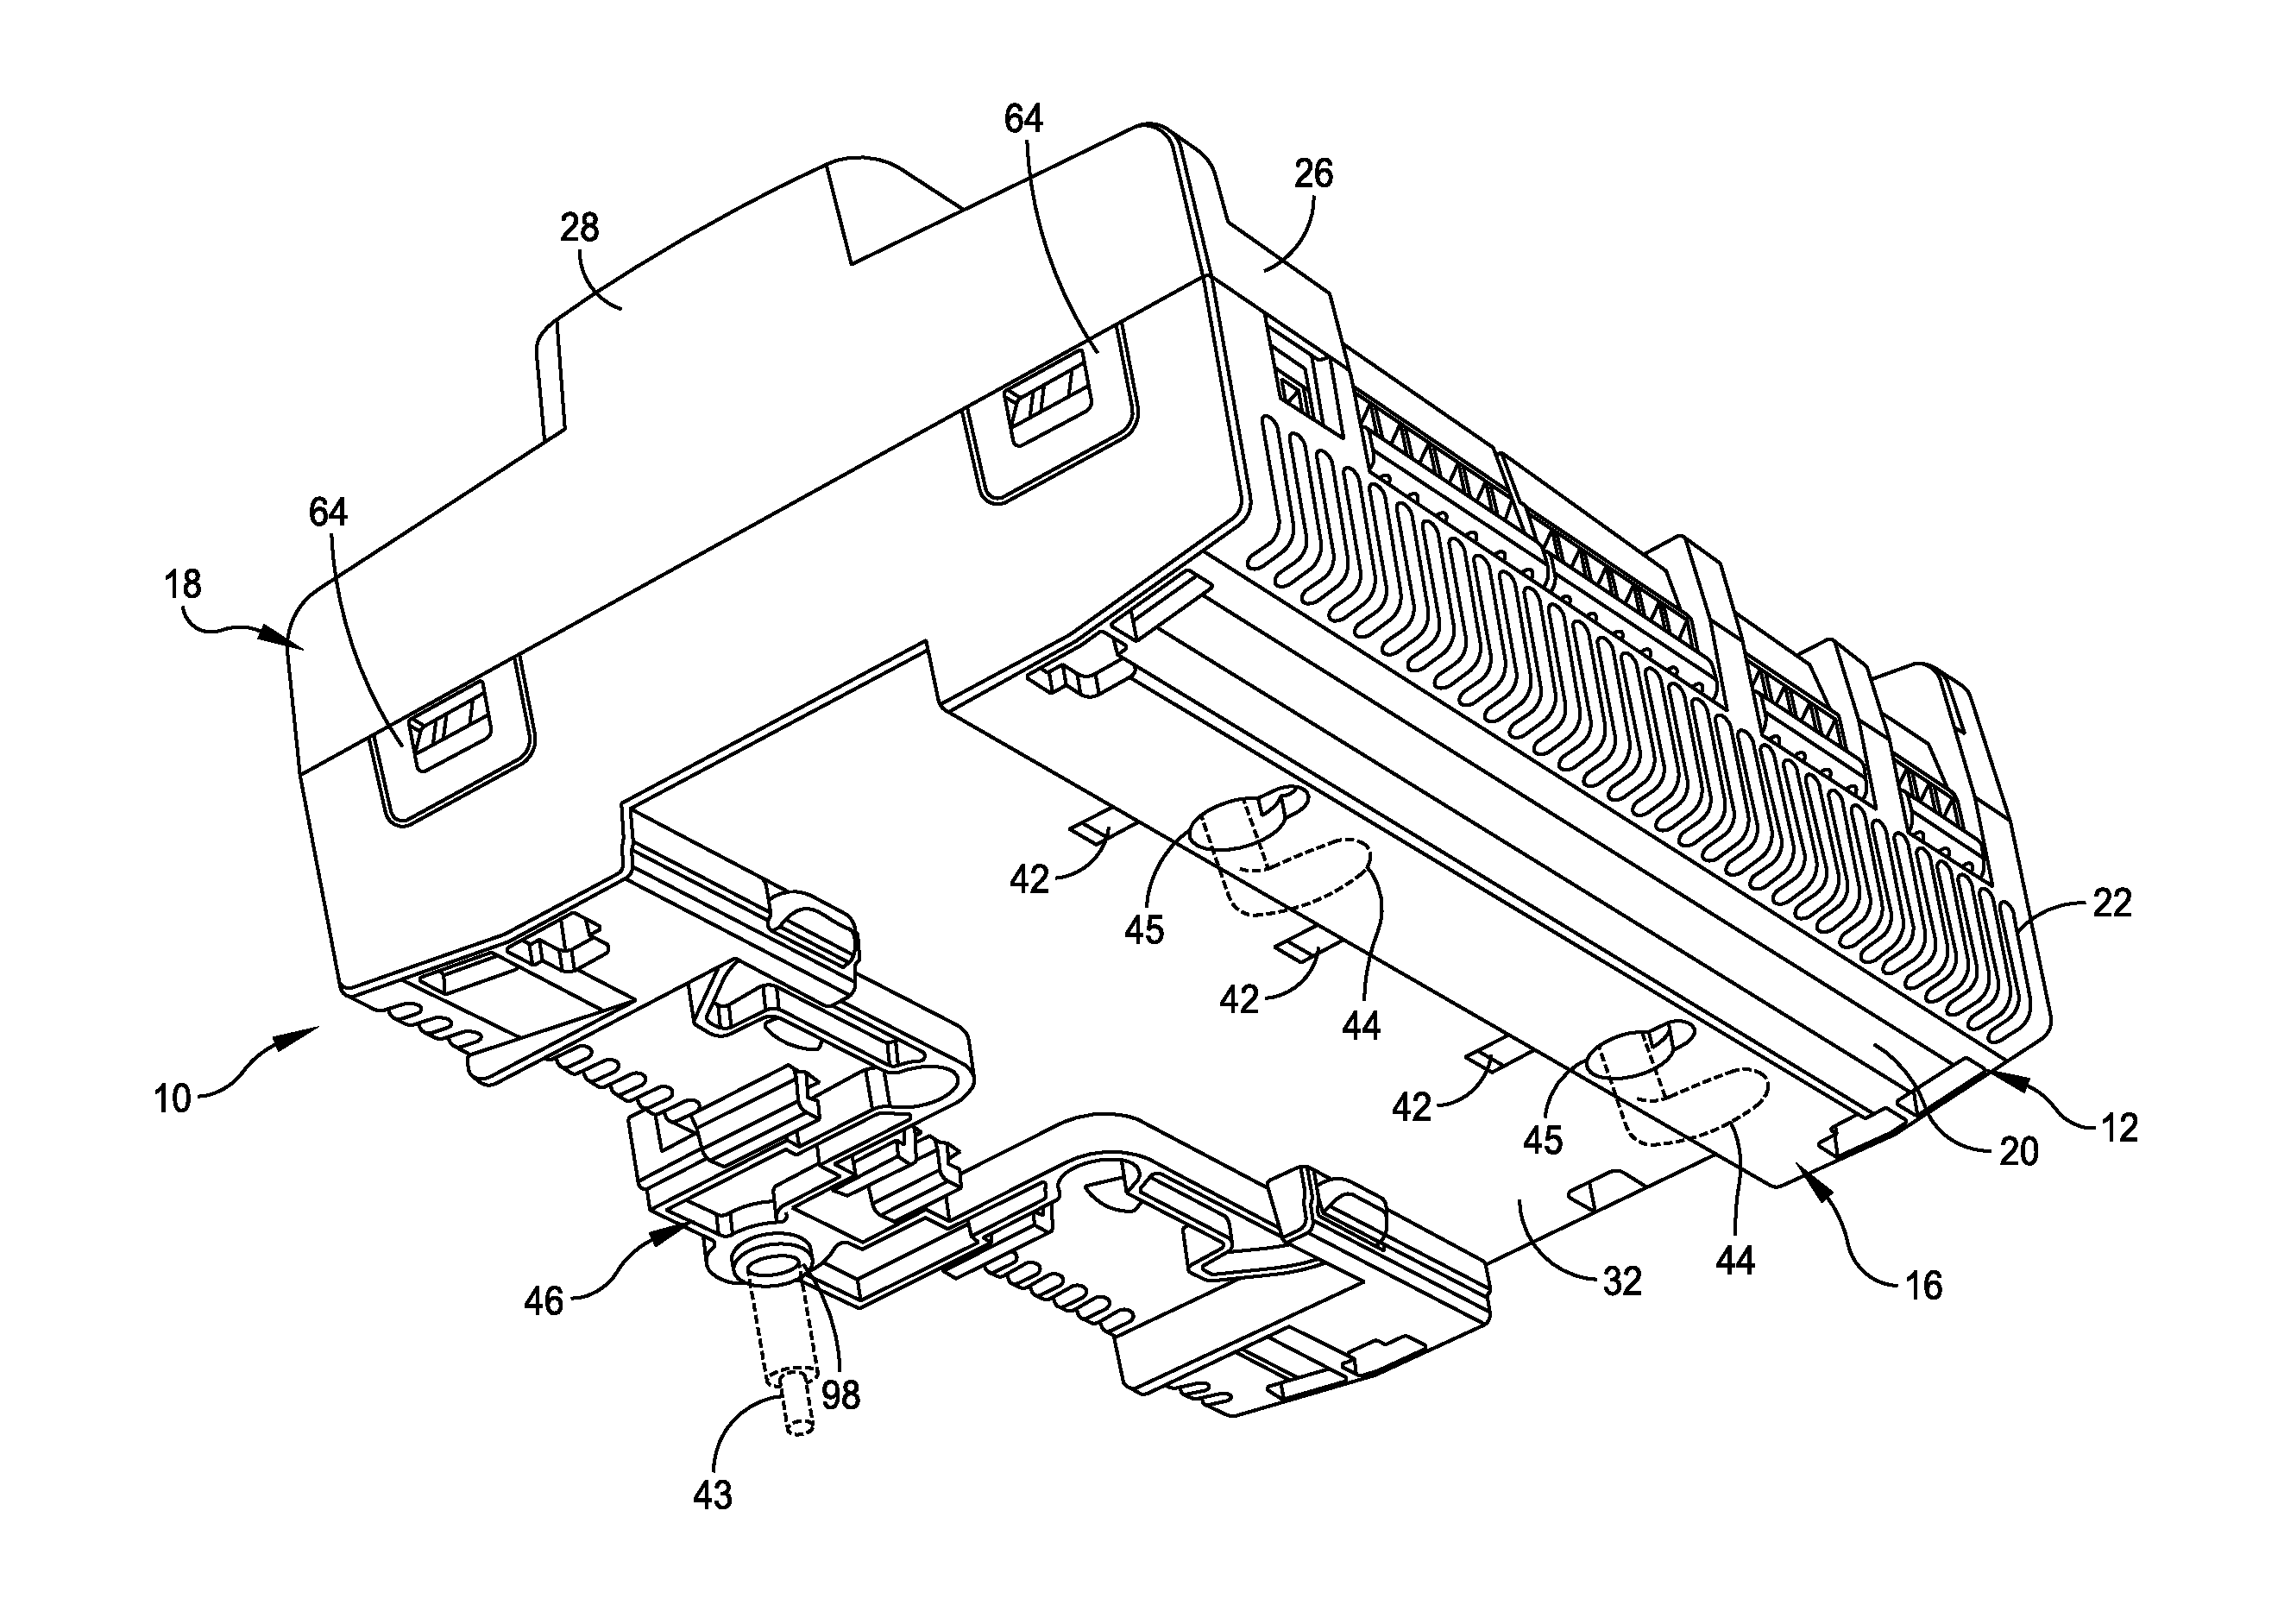 Din rail mounted enclosure assembly and method of use